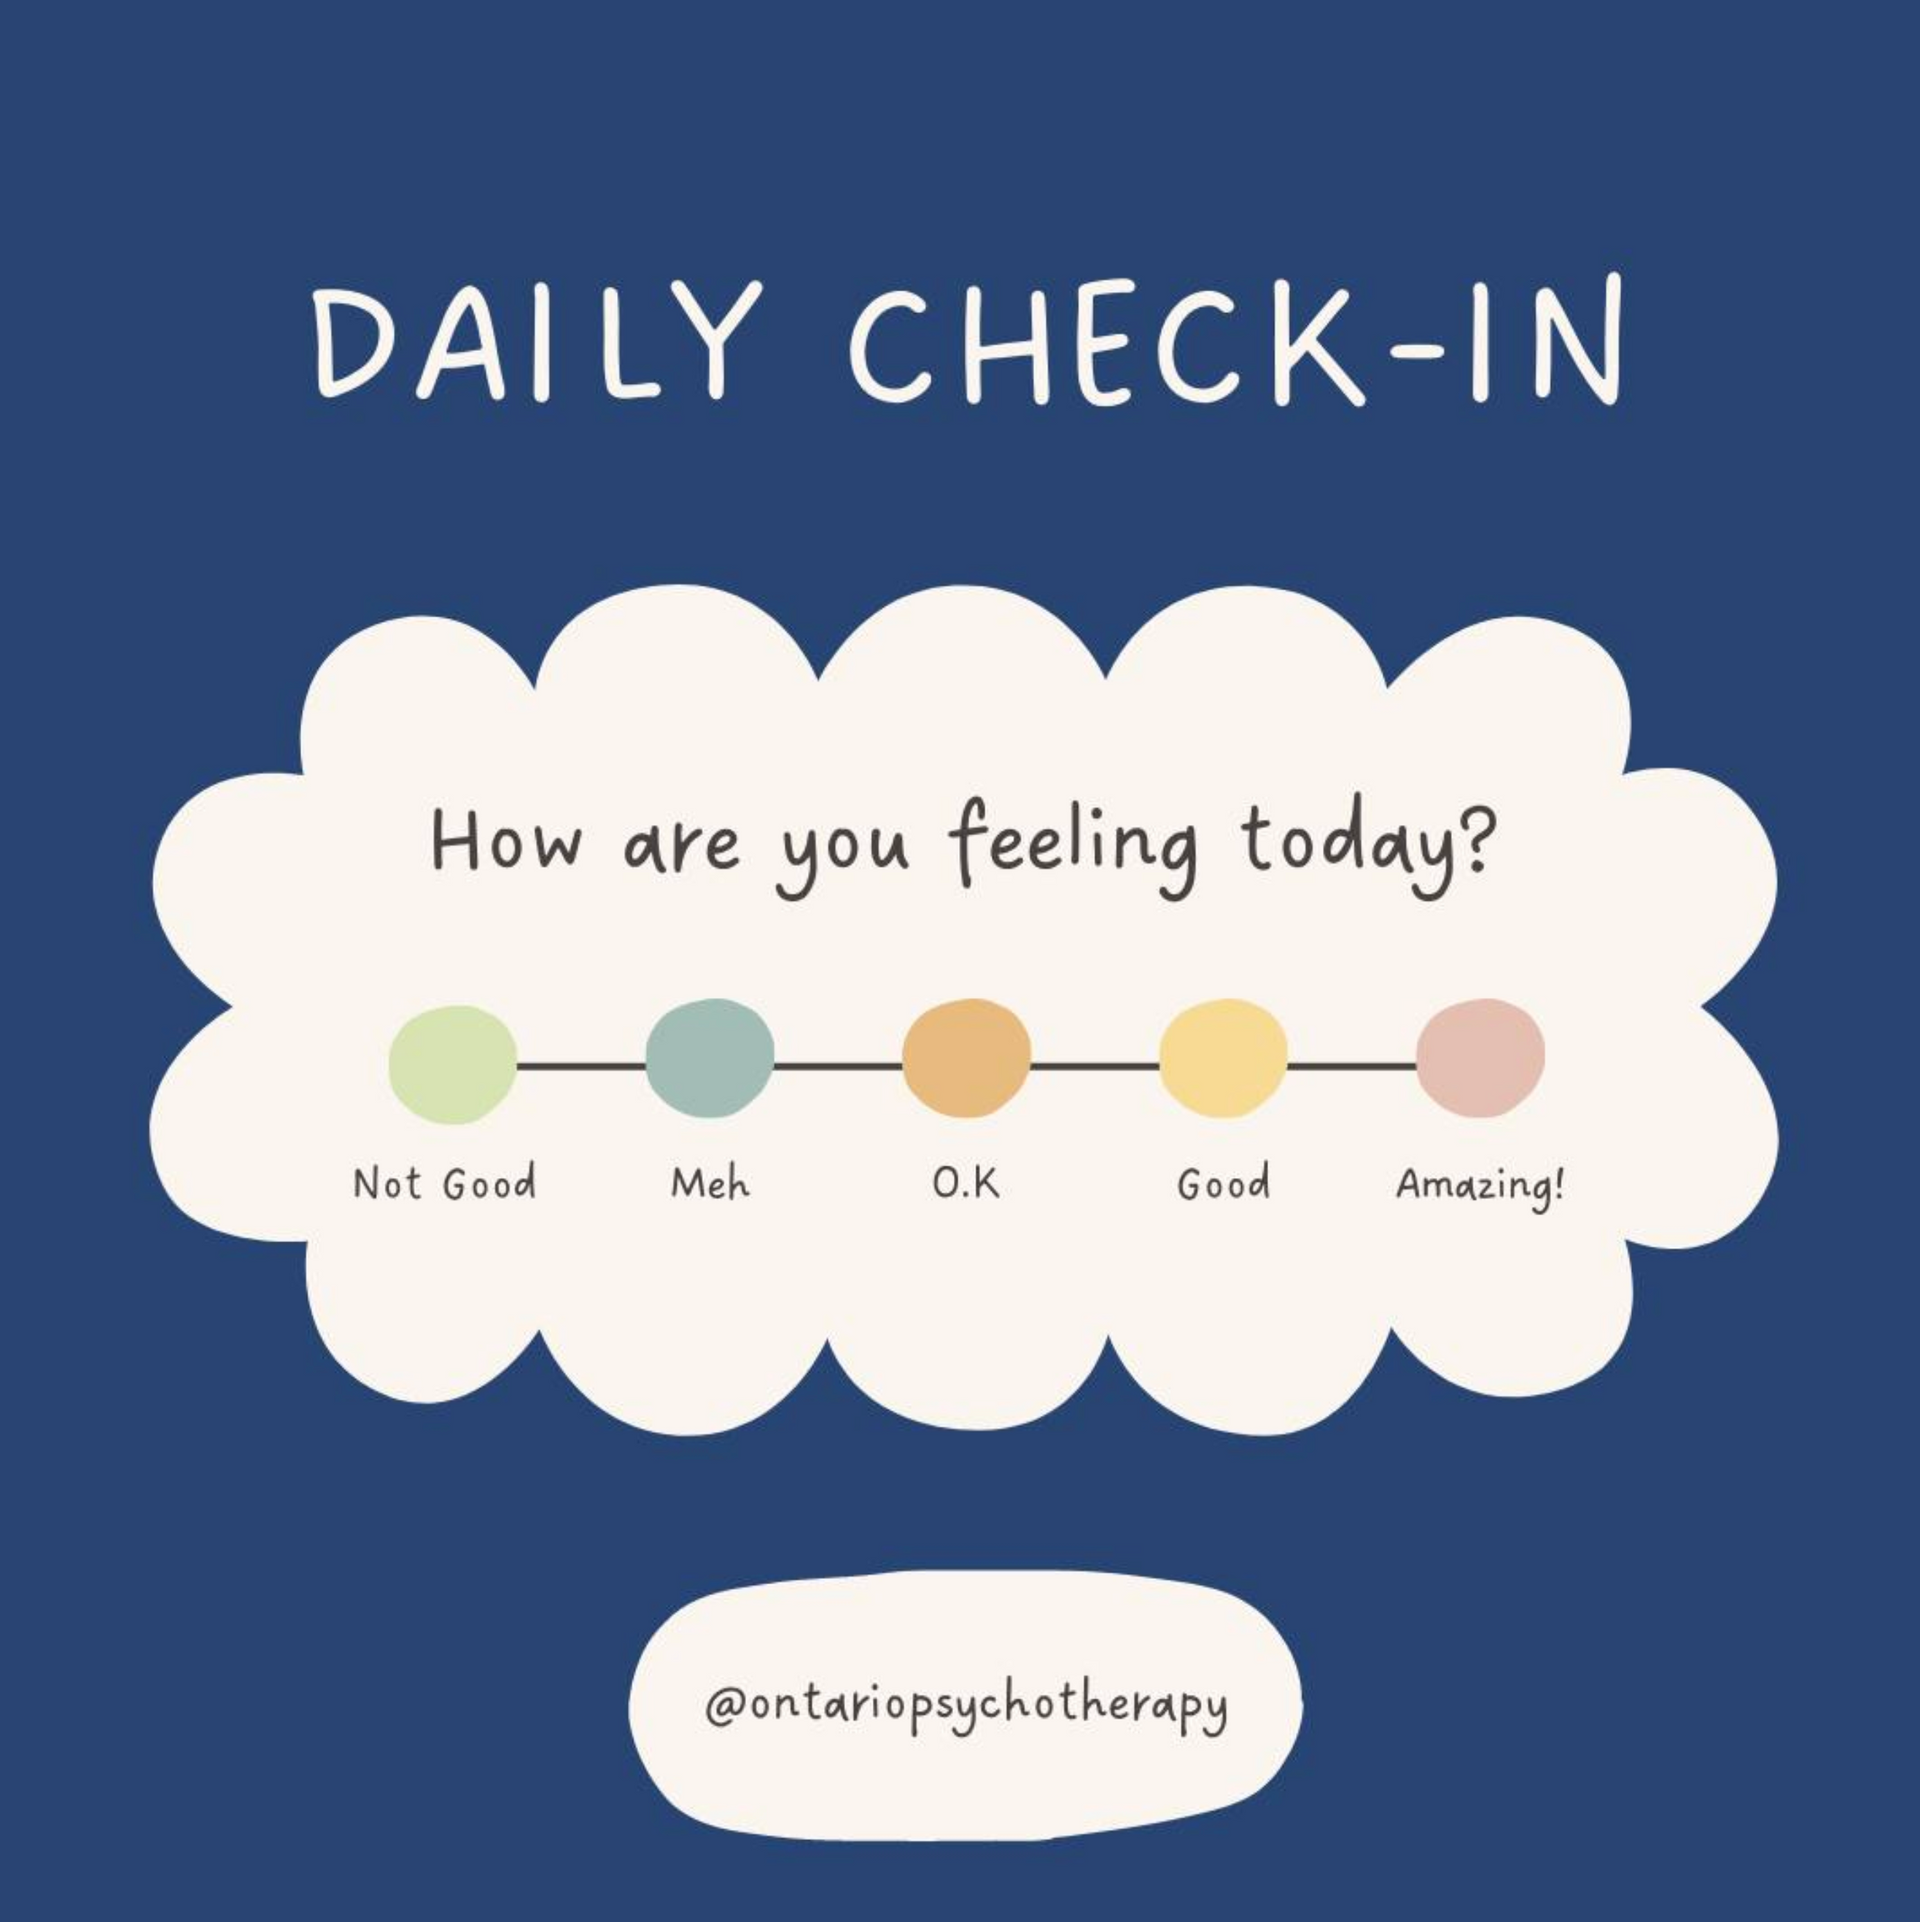 A daily check-in for how are you feeling today.